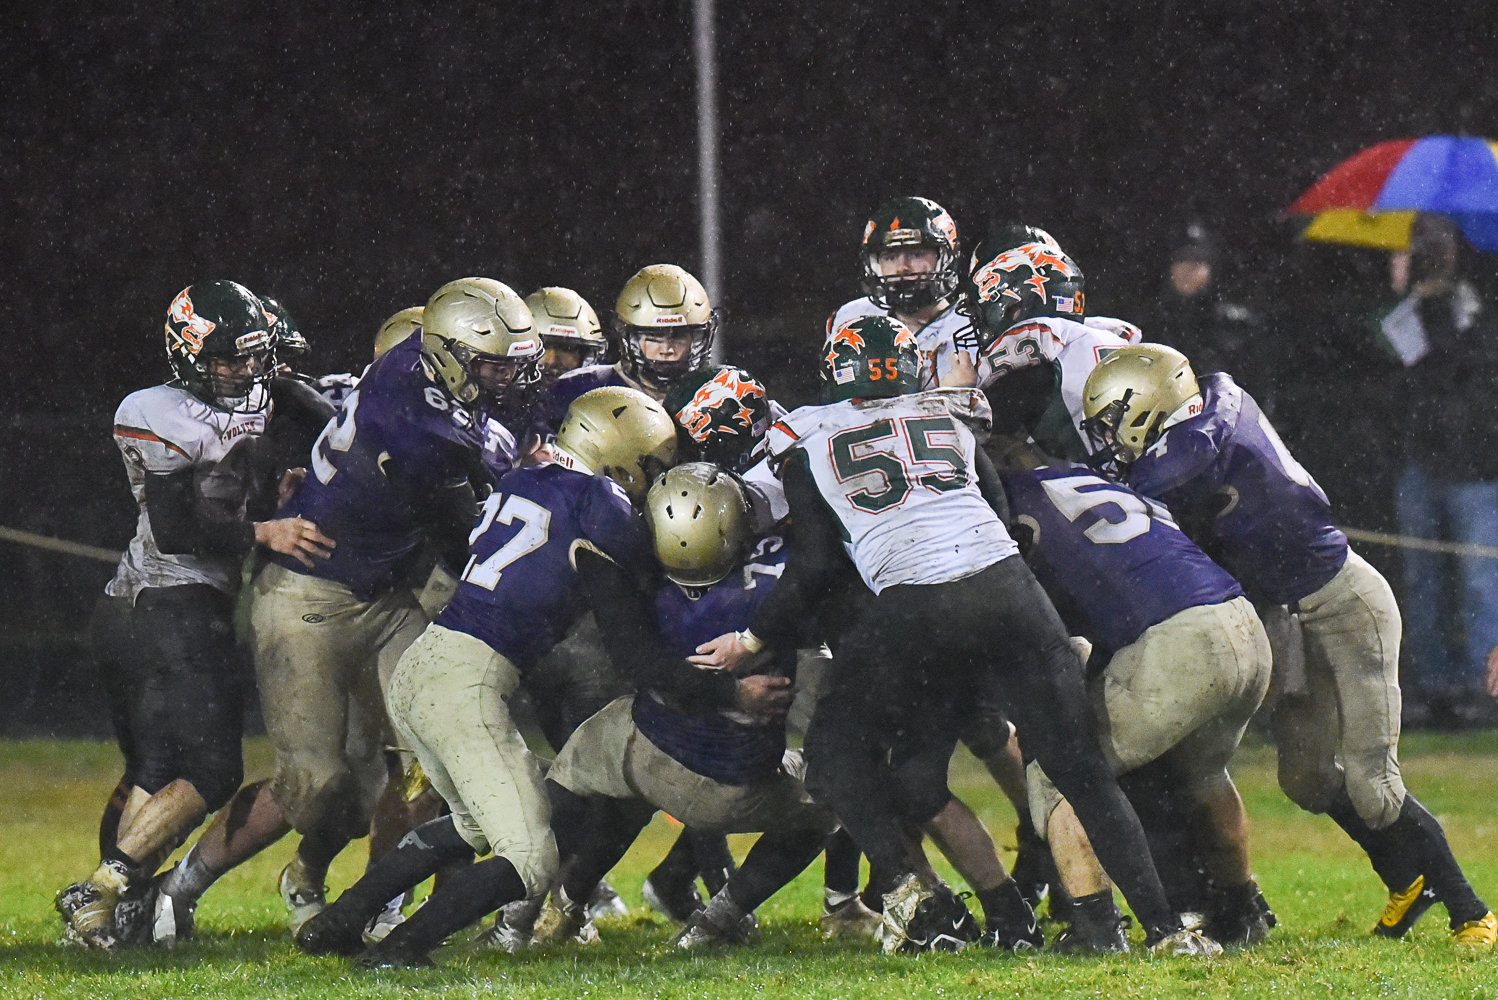 A mass of humanity tries to push the pile during Onalaska's 26-8 win over MWP on Nov. 4.